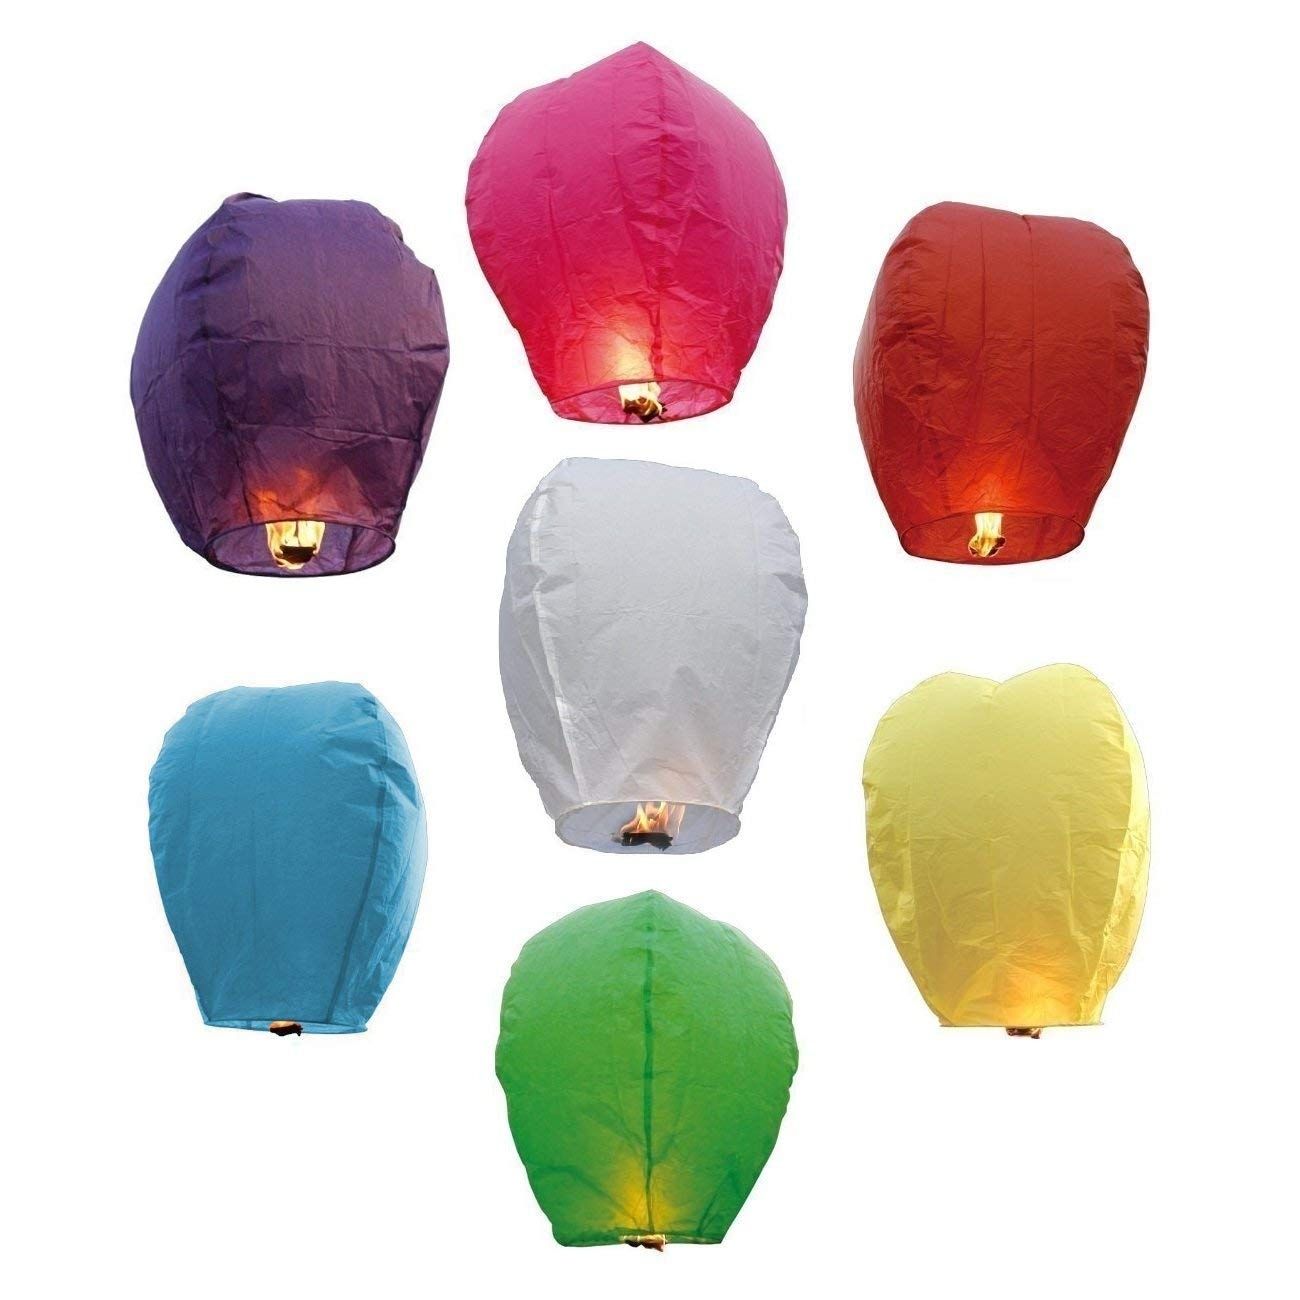 Amazon: Flyzer 20 Pack Flying Chinese Paper Sky Lanterns With Throughout Outdoor Memorial Lanterns (View 5 of 20)